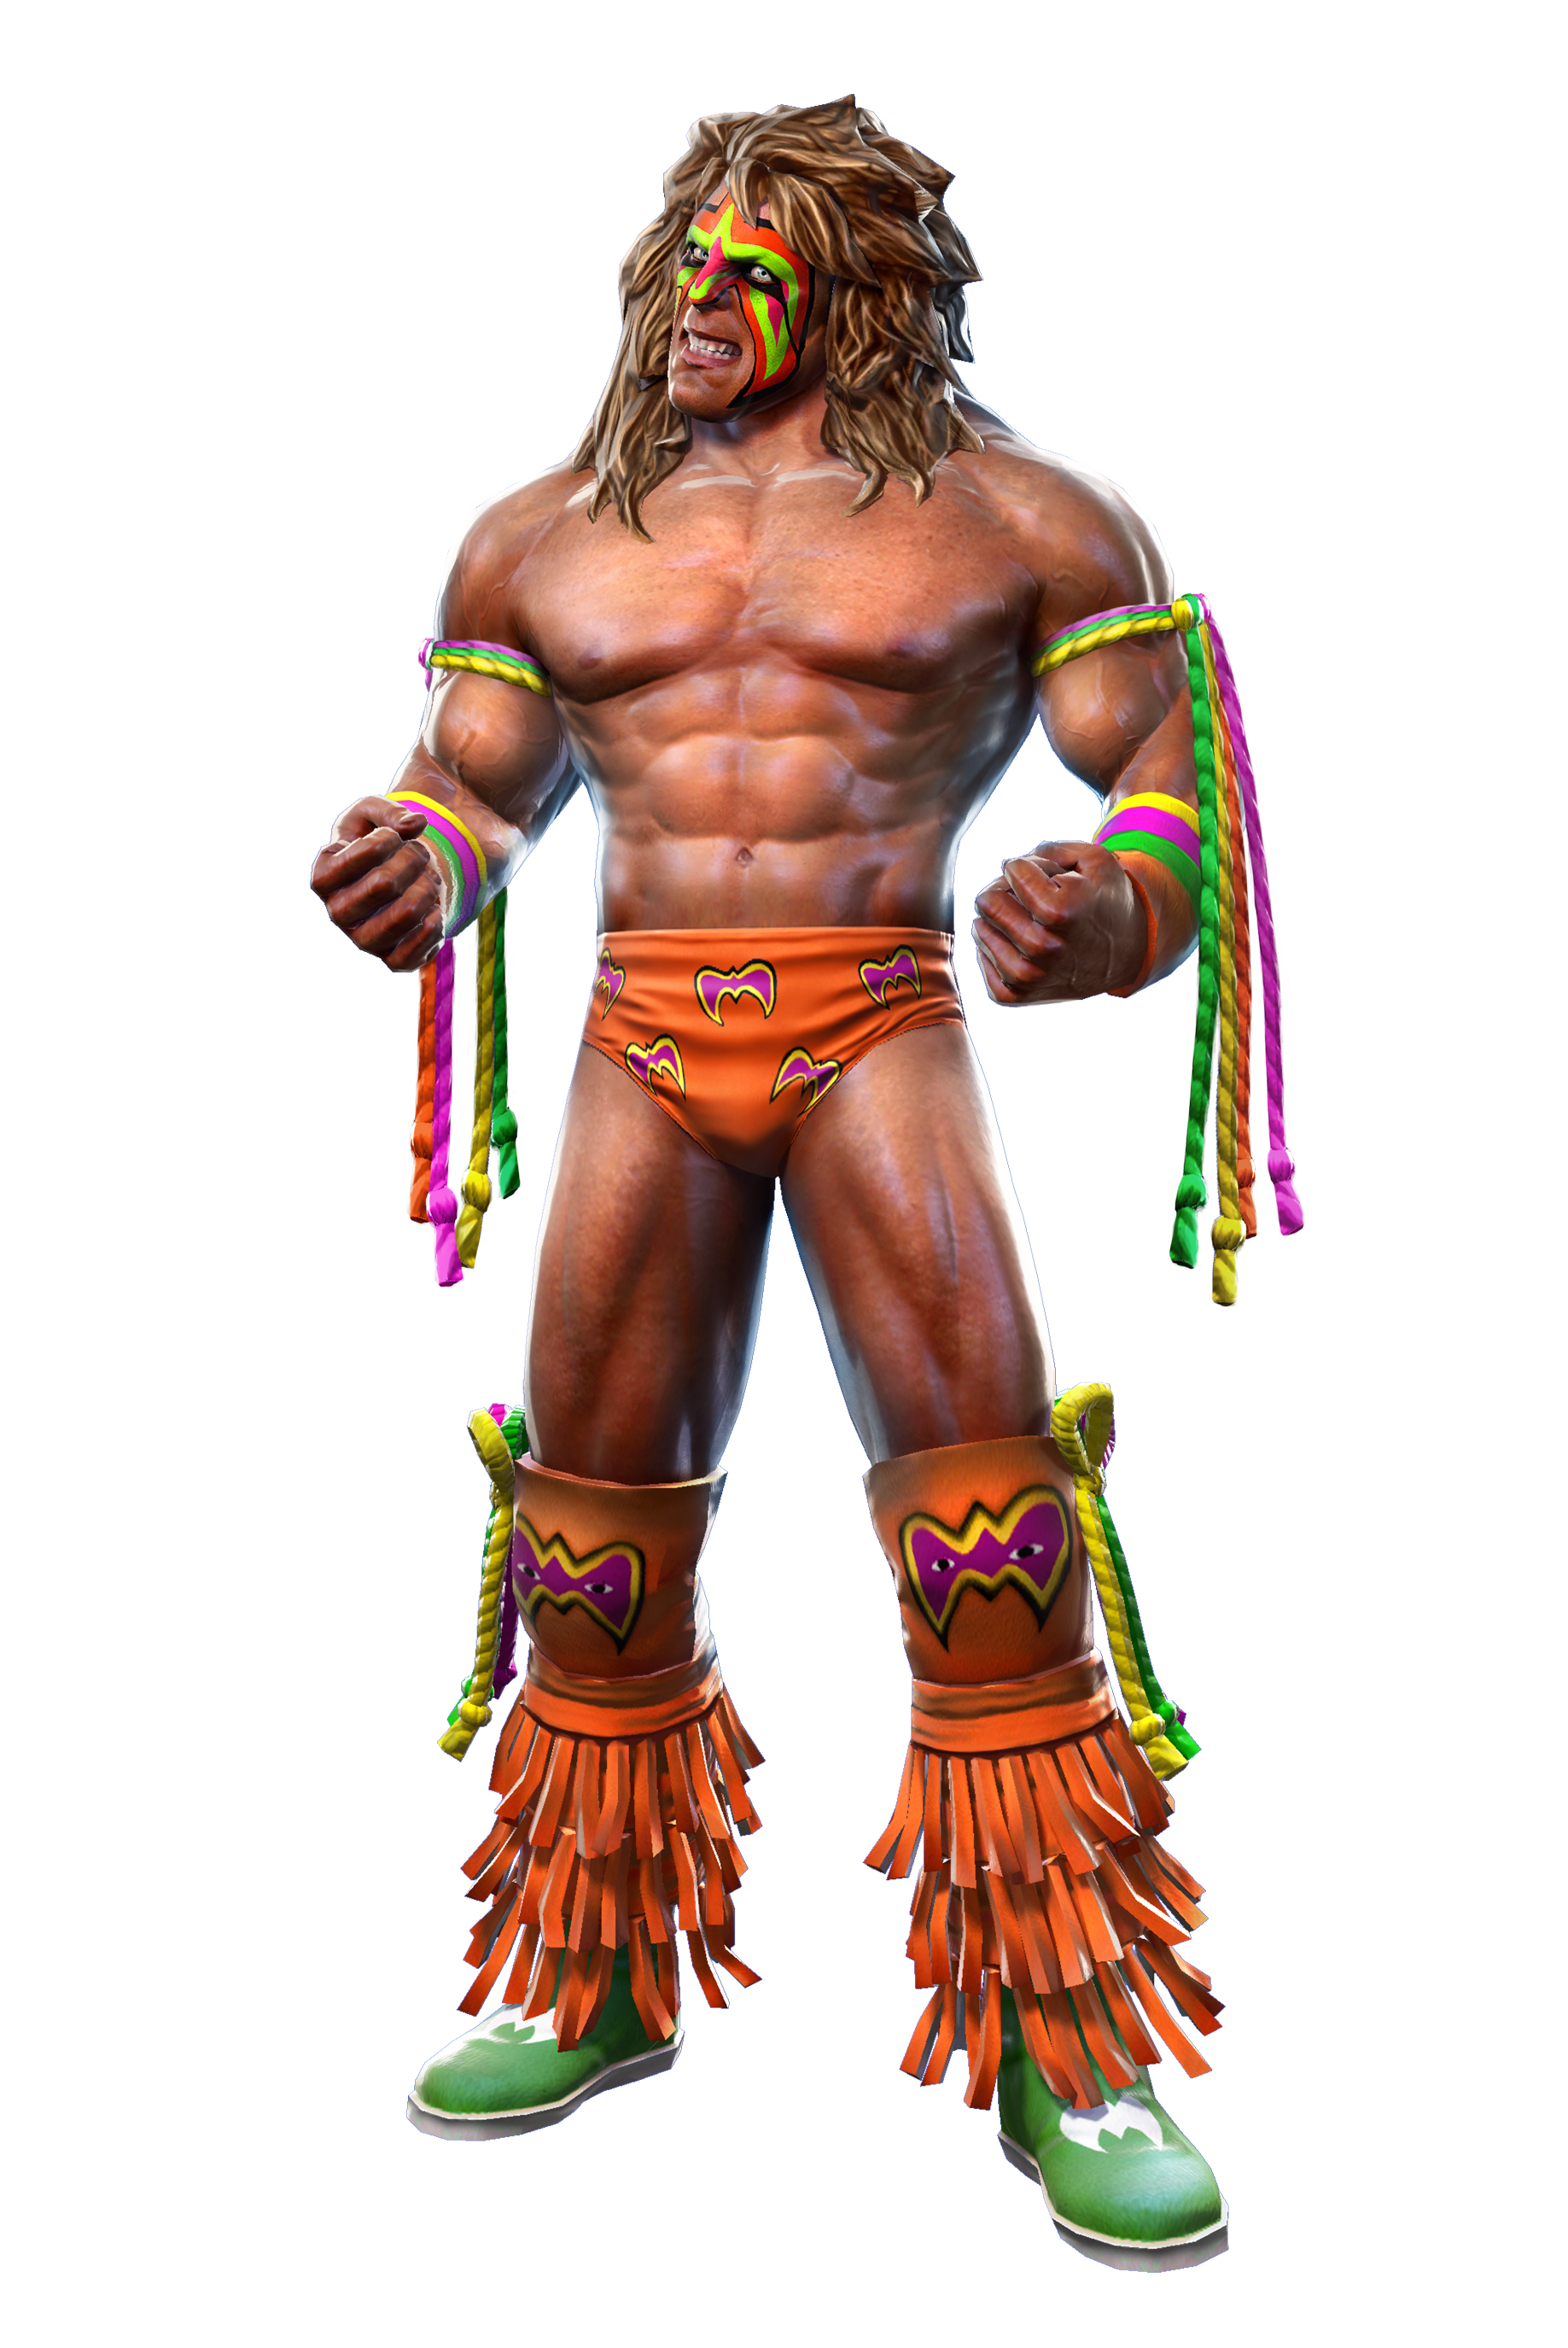 Professional wrestler characters giant. Wrestlers clipart wrestling champion